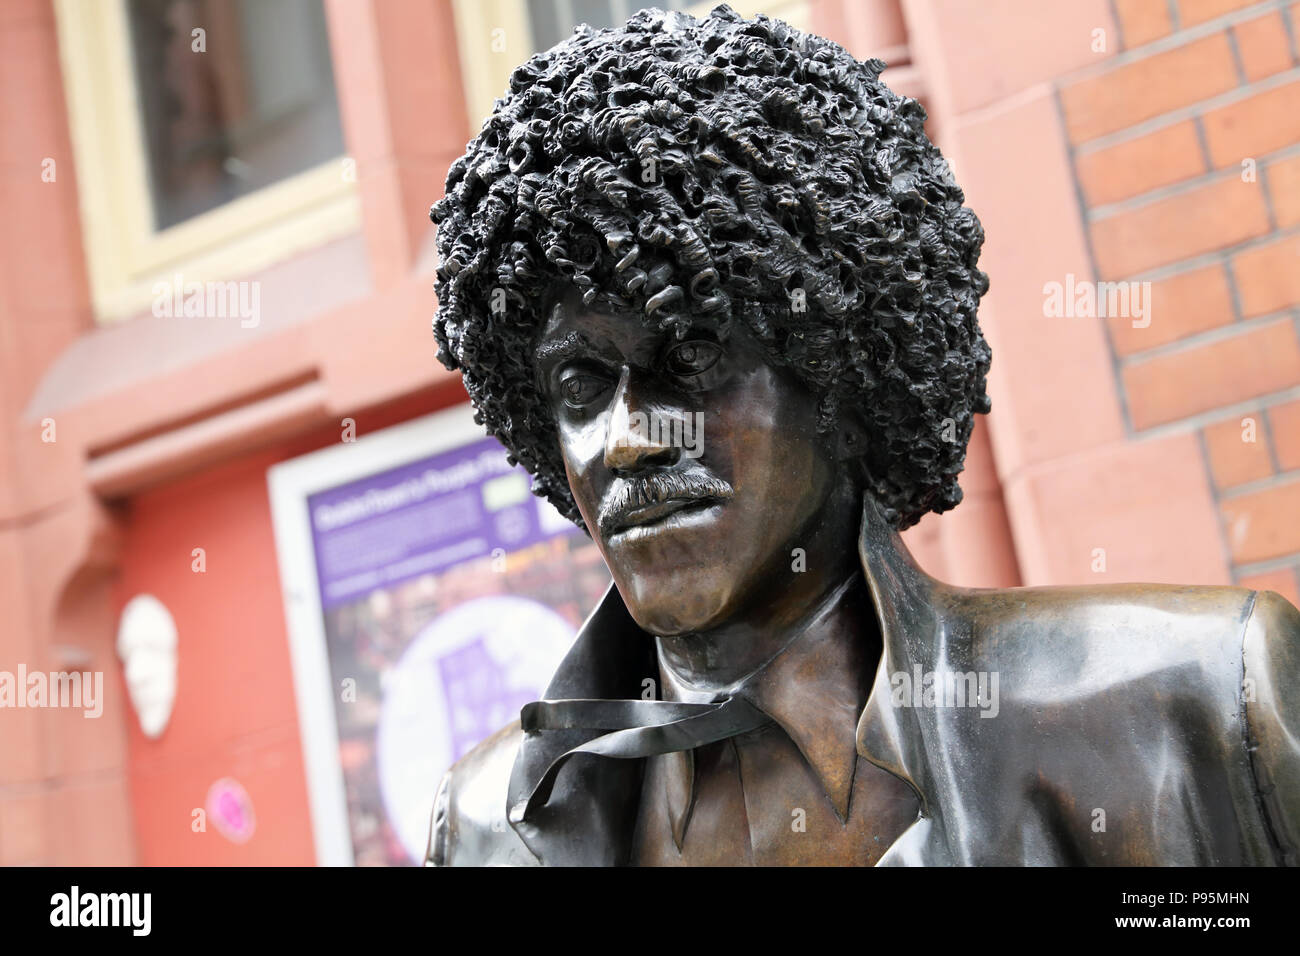 A close up view of the bronze statue of rockstar Phil Lynott memorializes the late singer and bassist of the band Thin Lizzy. Dublin, Ireland. Stock Photo